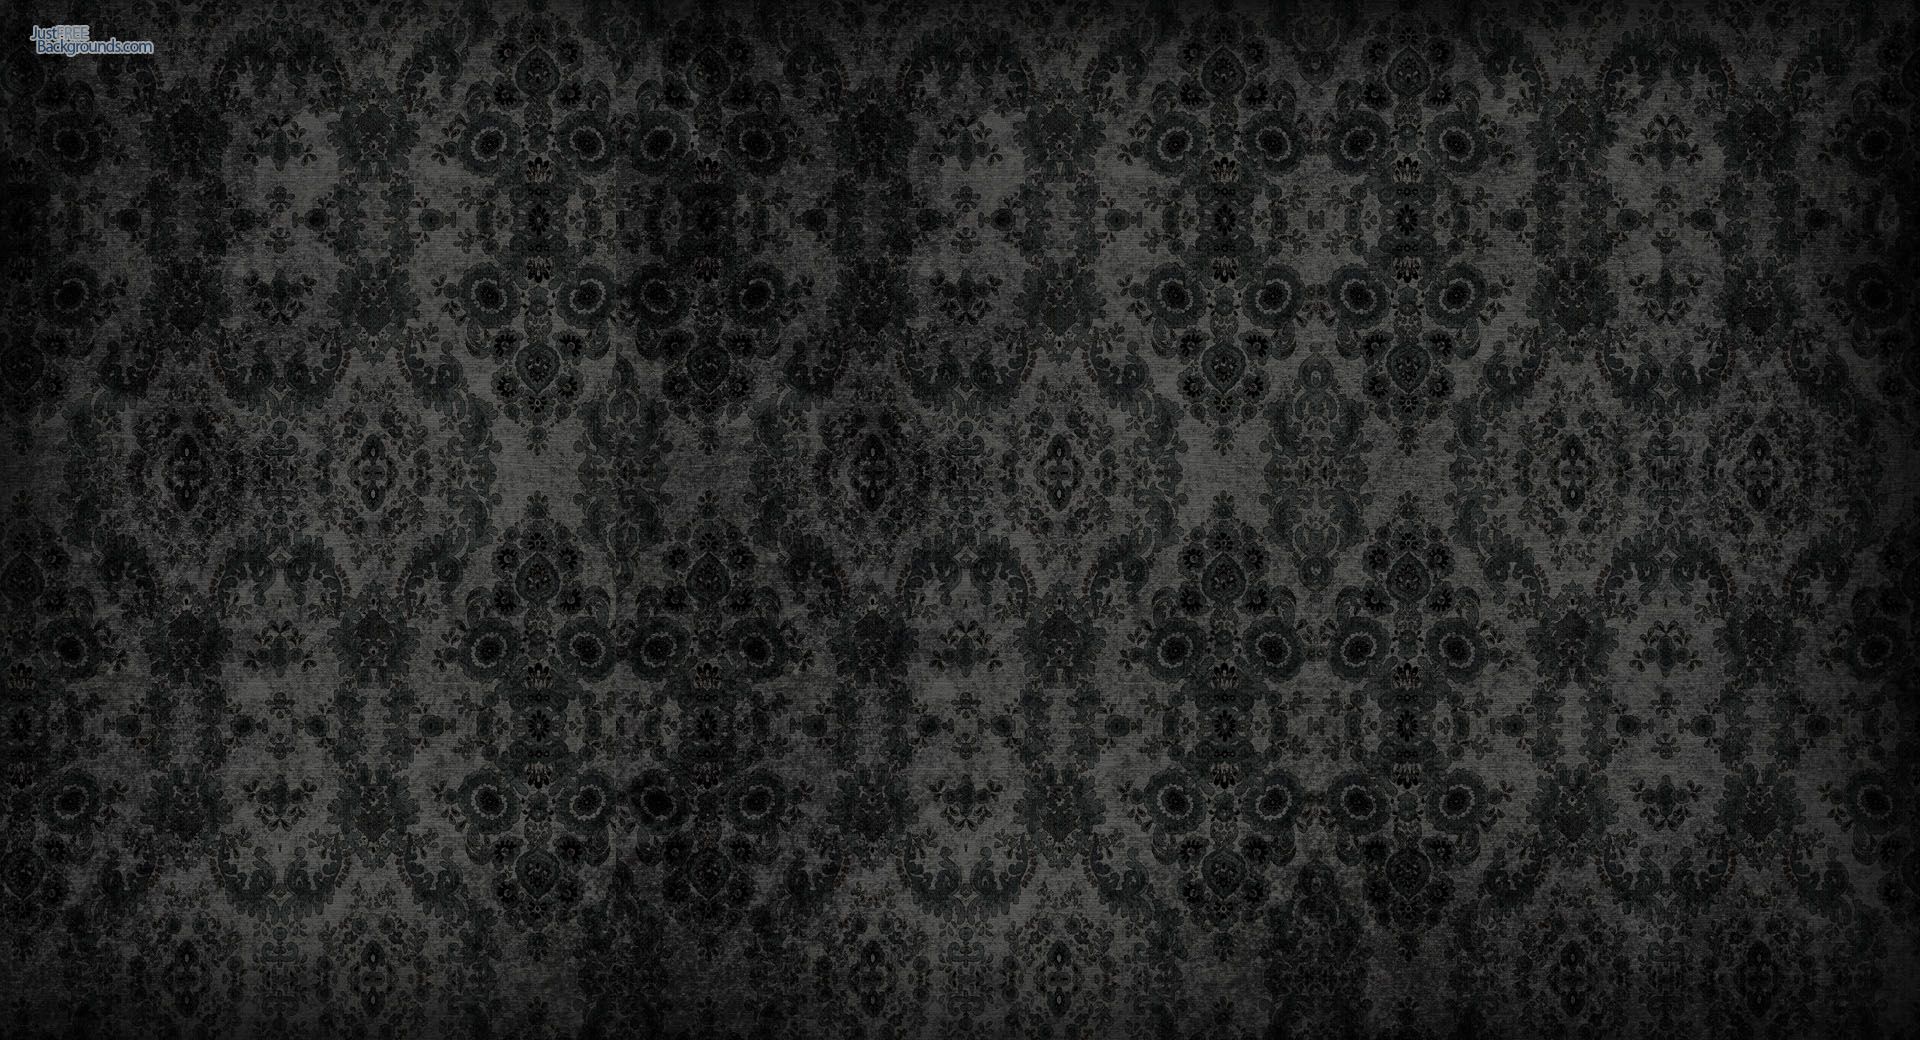 Black Vintage Wallpapers | The Art Mad Wallpapers